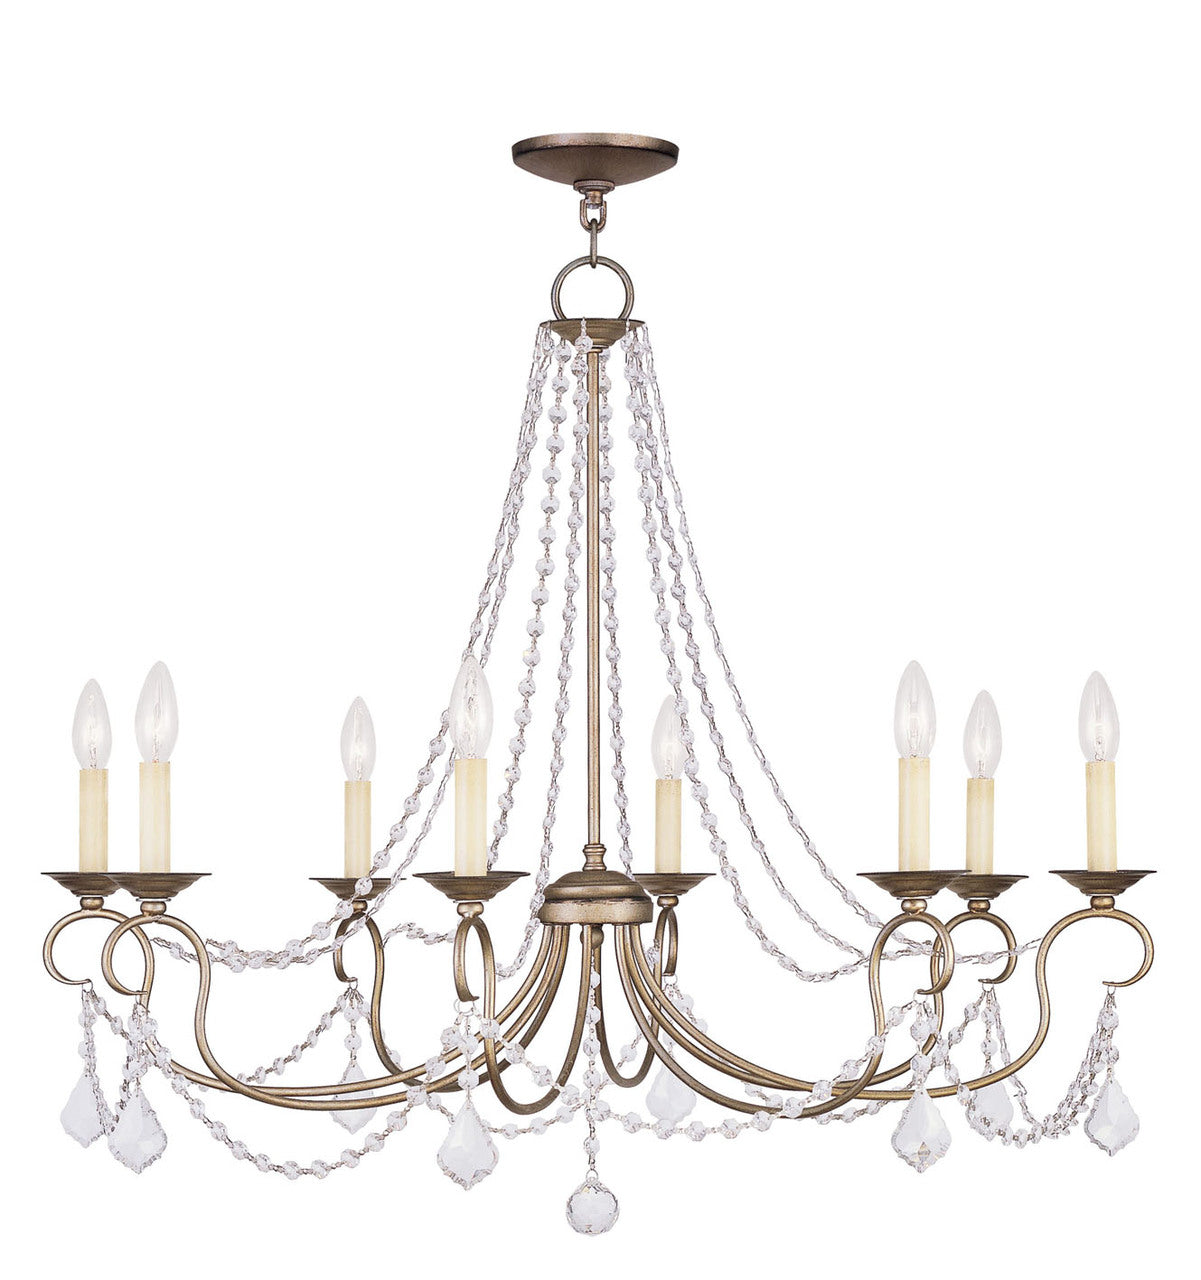 LIVEX Lighting 6518-73 Pennington Chandelier with Hand-Painted Antique Silver Leaves (8 Light)